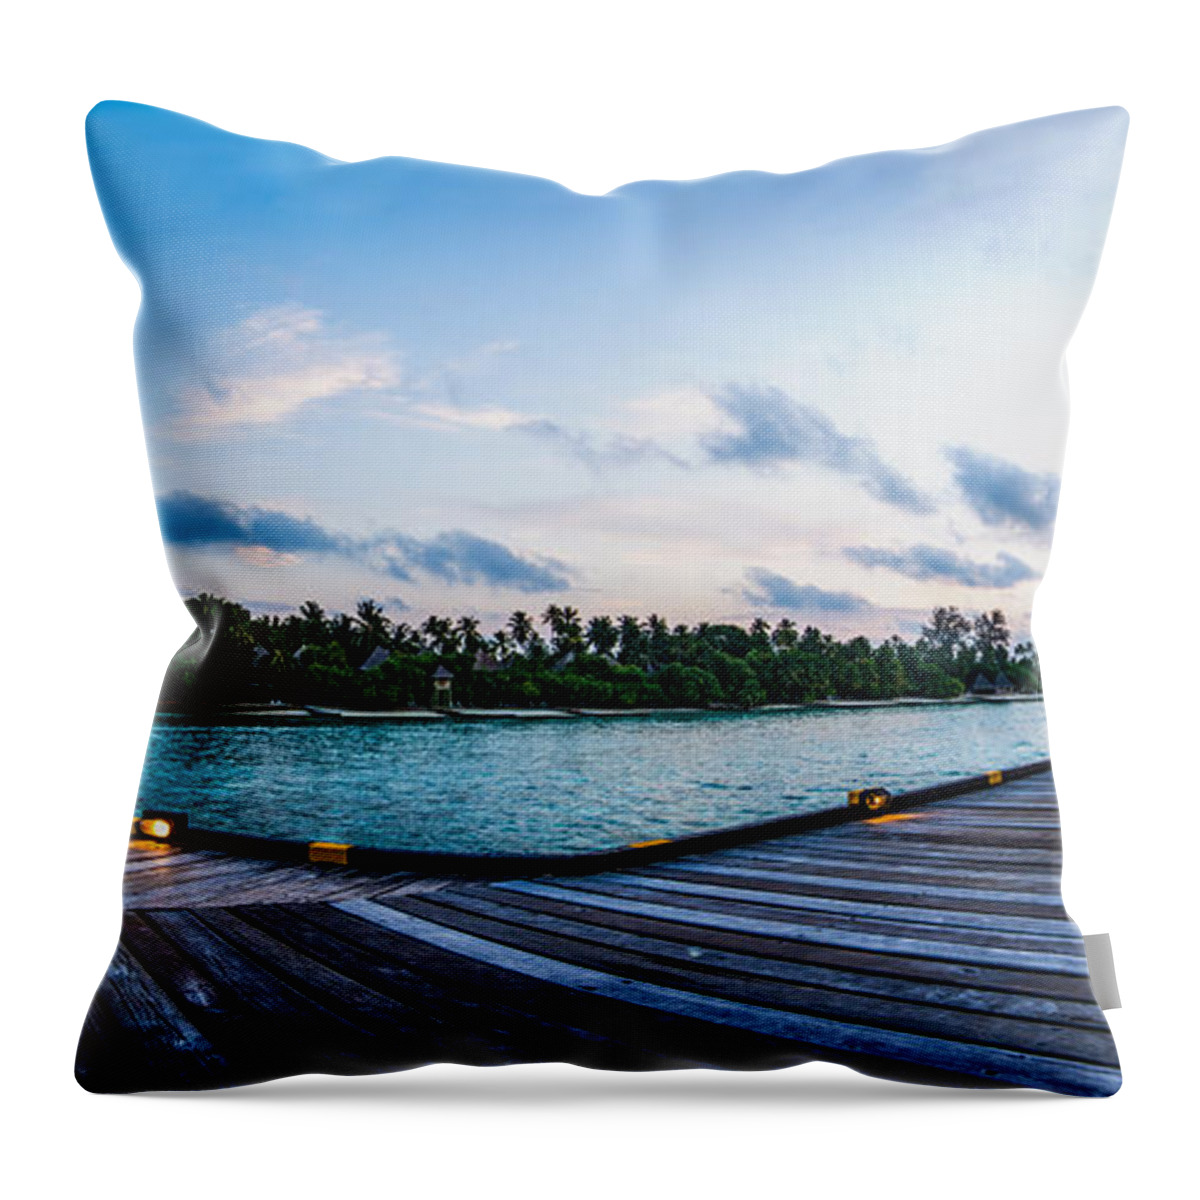 Architecture Throw Pillow featuring the photograph The Boardwalk by Hannes Cmarits